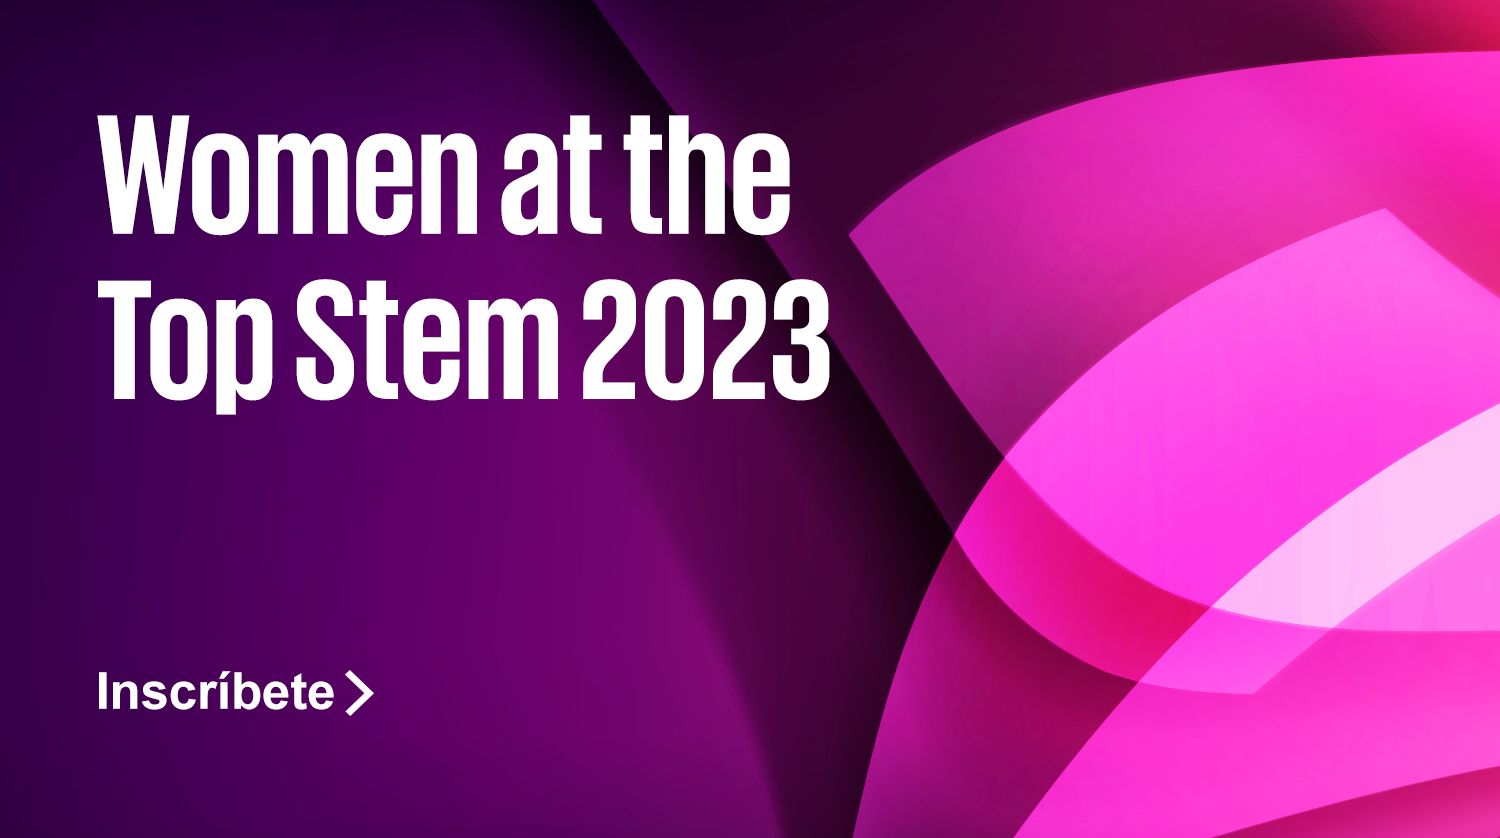 Women at the top Stem 2023